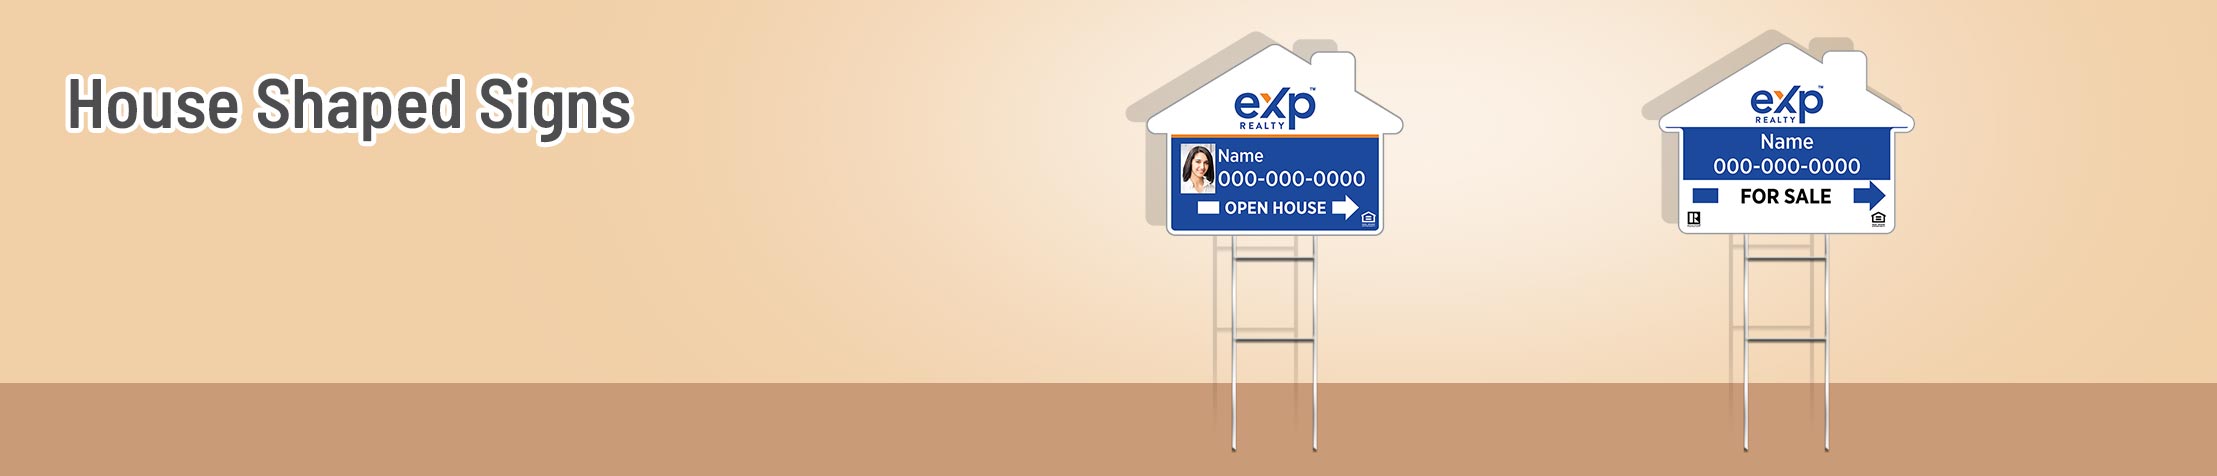 eXp Realty Real Estate House Shaped Signs -  real estate signs | Sparkprint.com